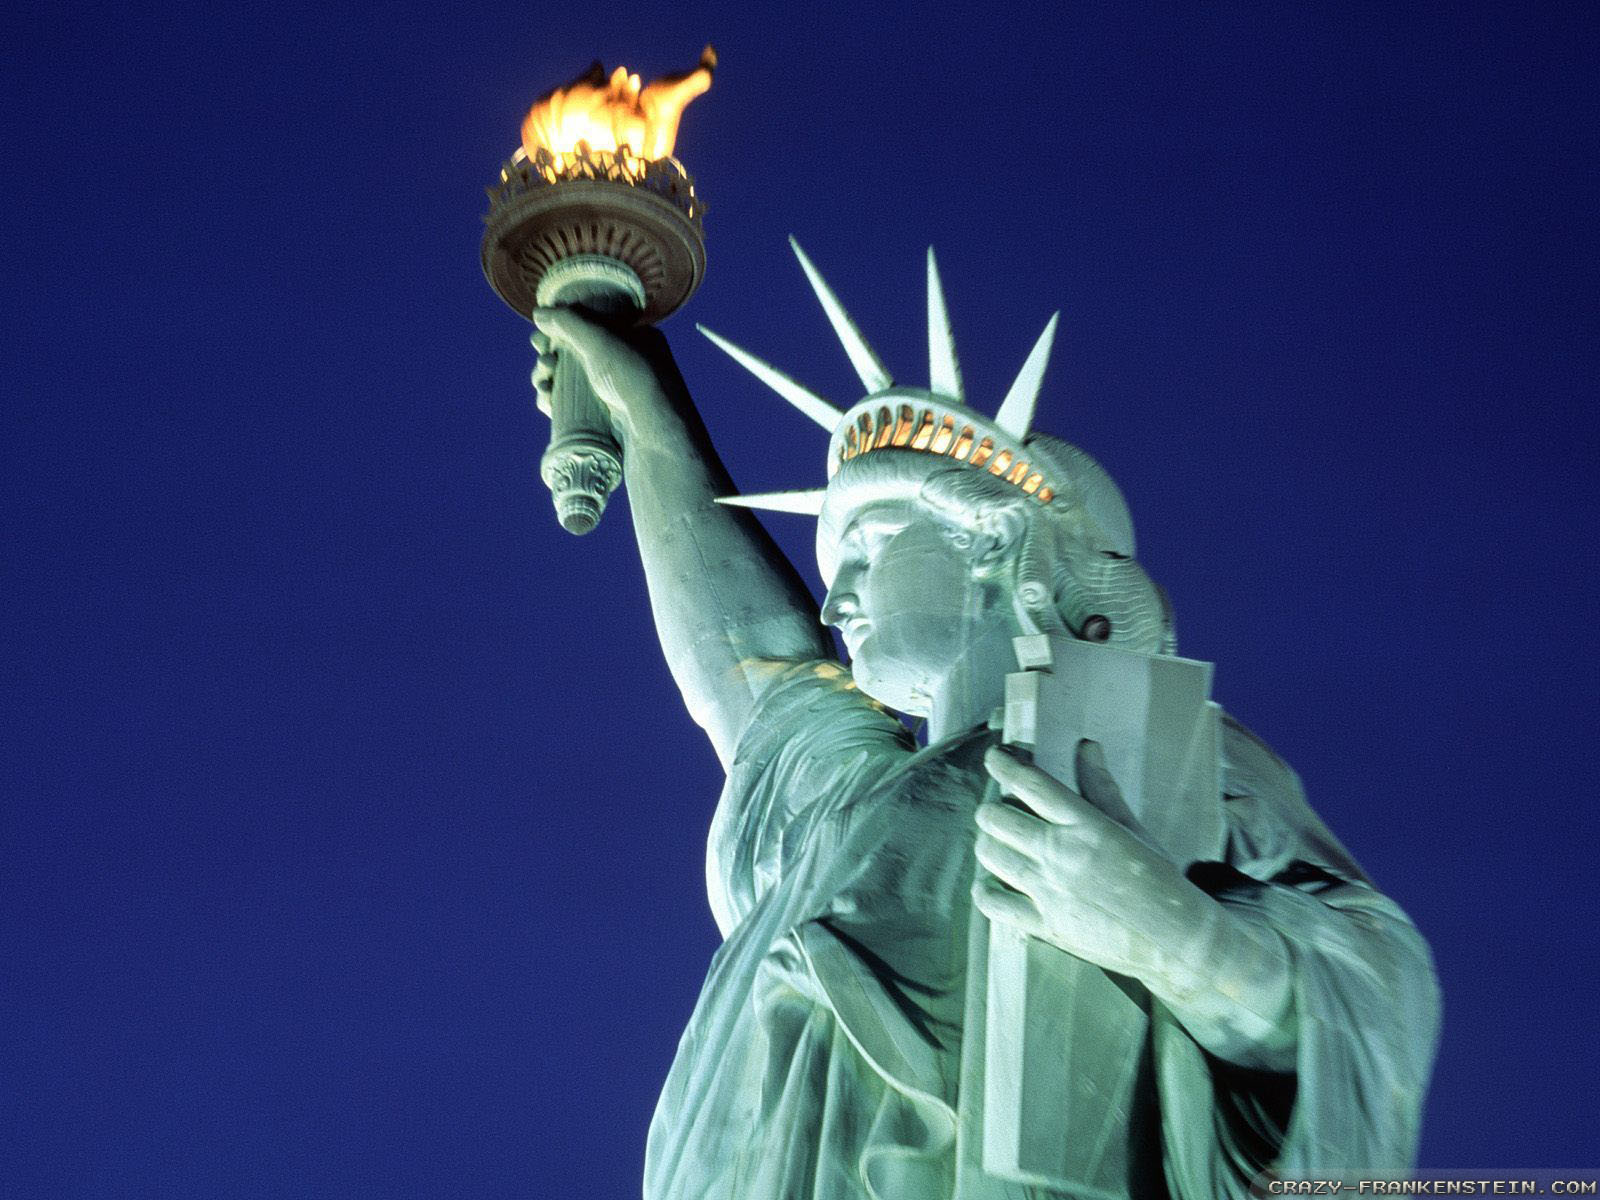 Download - Statue Of Liberty Torch At Night , HD Wallpaper & Backgrounds